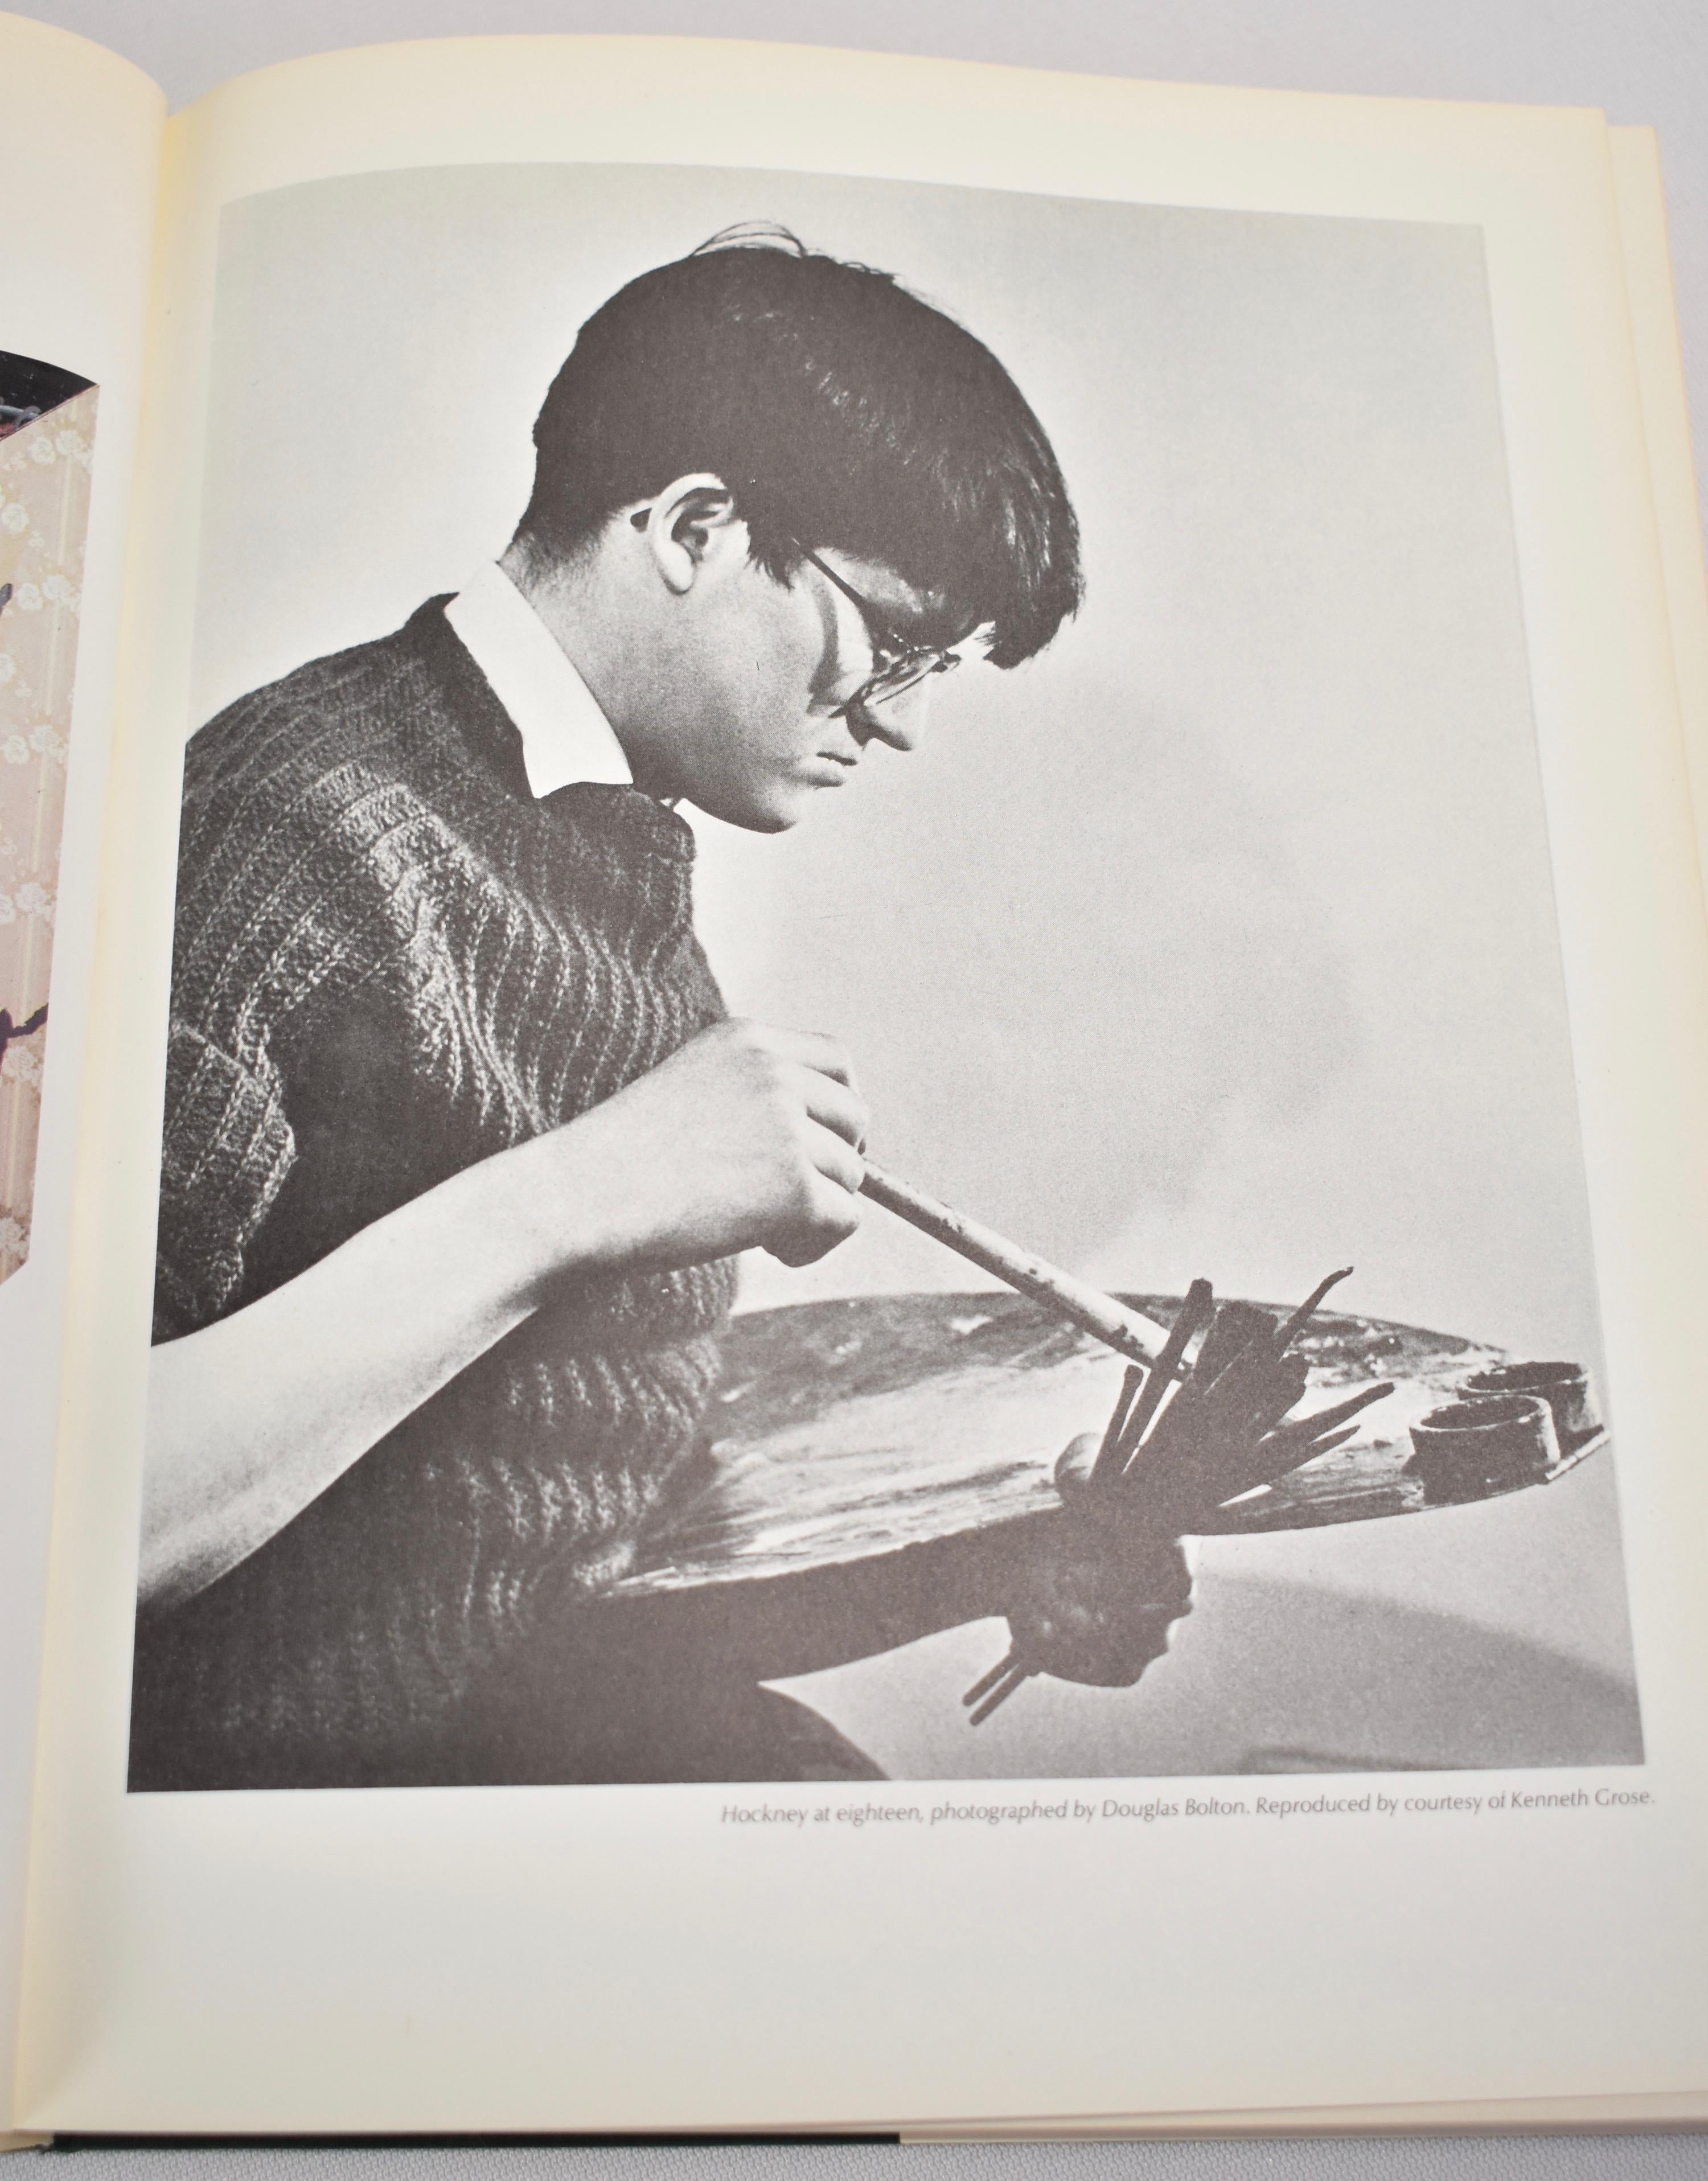 Hardback coffee table book containing the autobiographical work of artist, David Hockney. By David Hockney, published in 1976. First edition, 312 pages.

